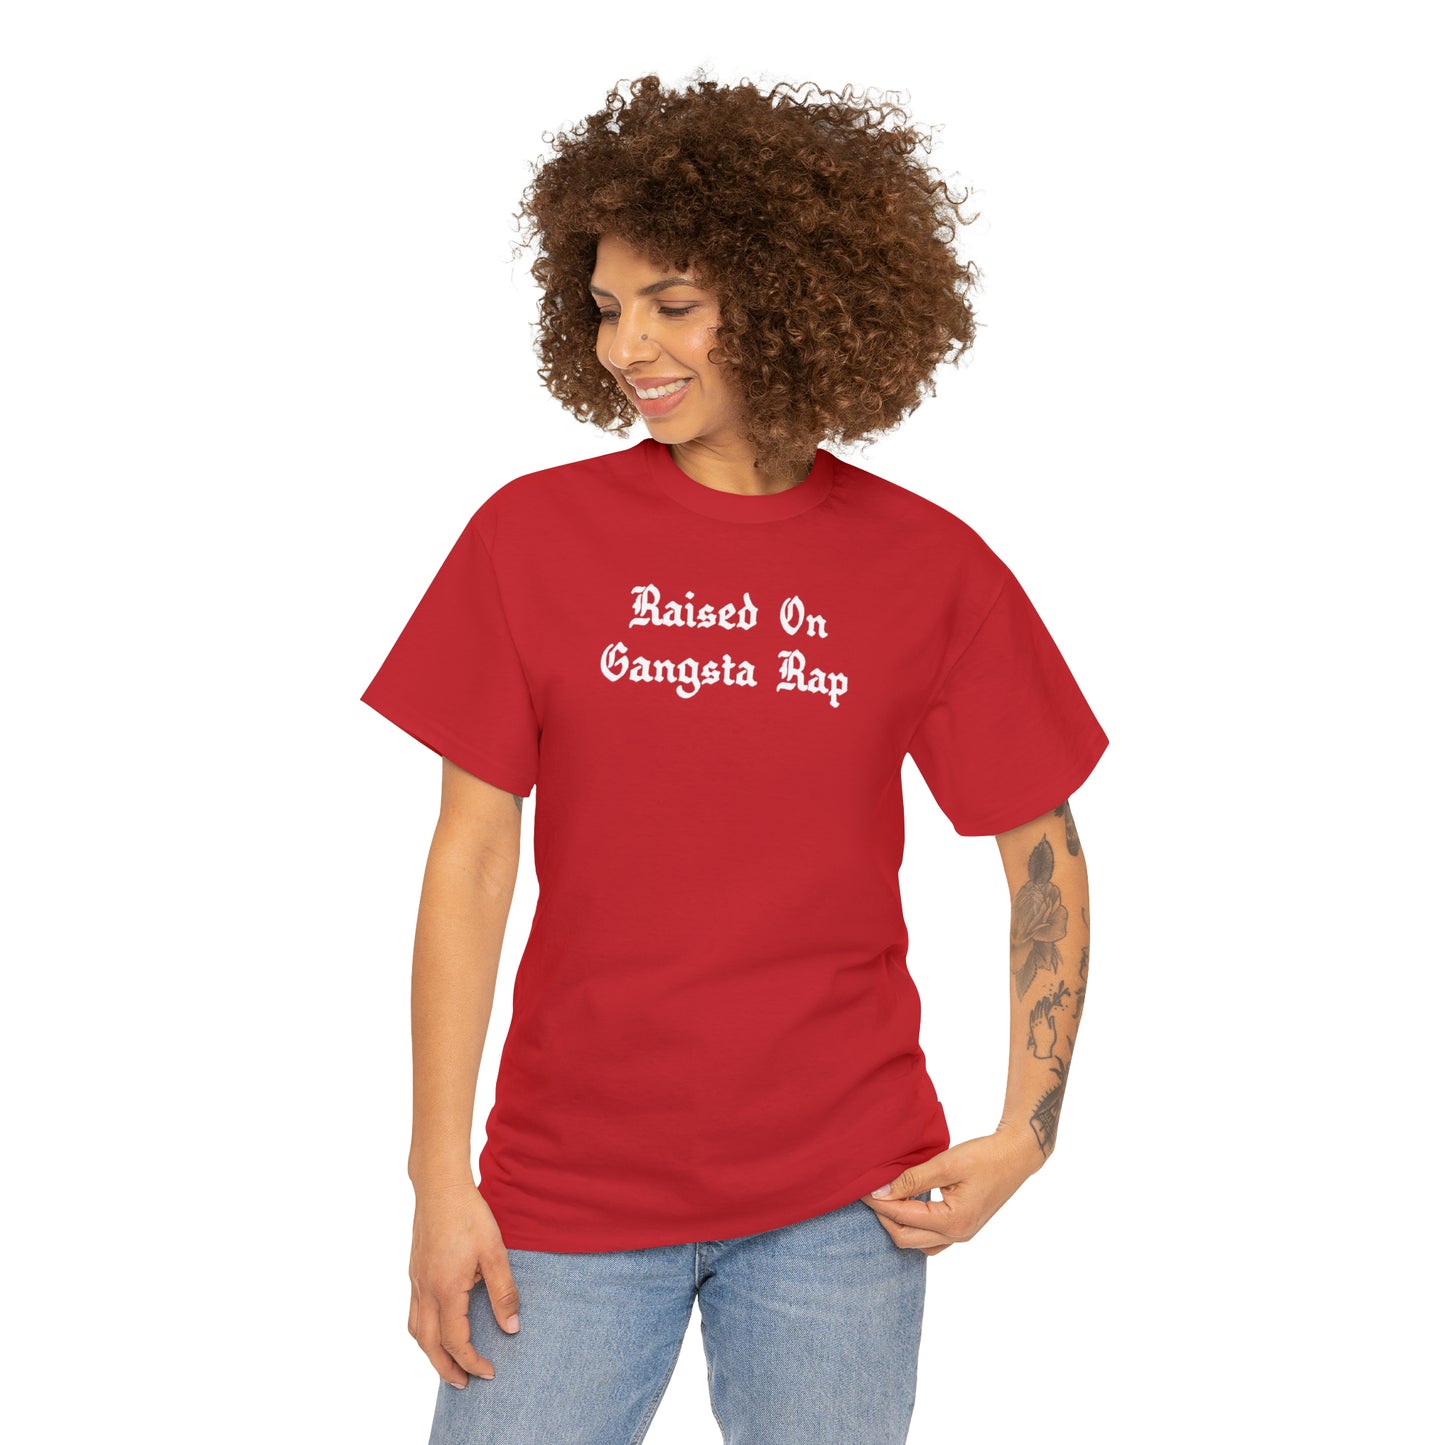 Raised on Gangsta Rap Shirt Great gift for a Hip-Hop & Rap Lover T-Shirt, Rap T-Shirt, Gangsta Rap Tee